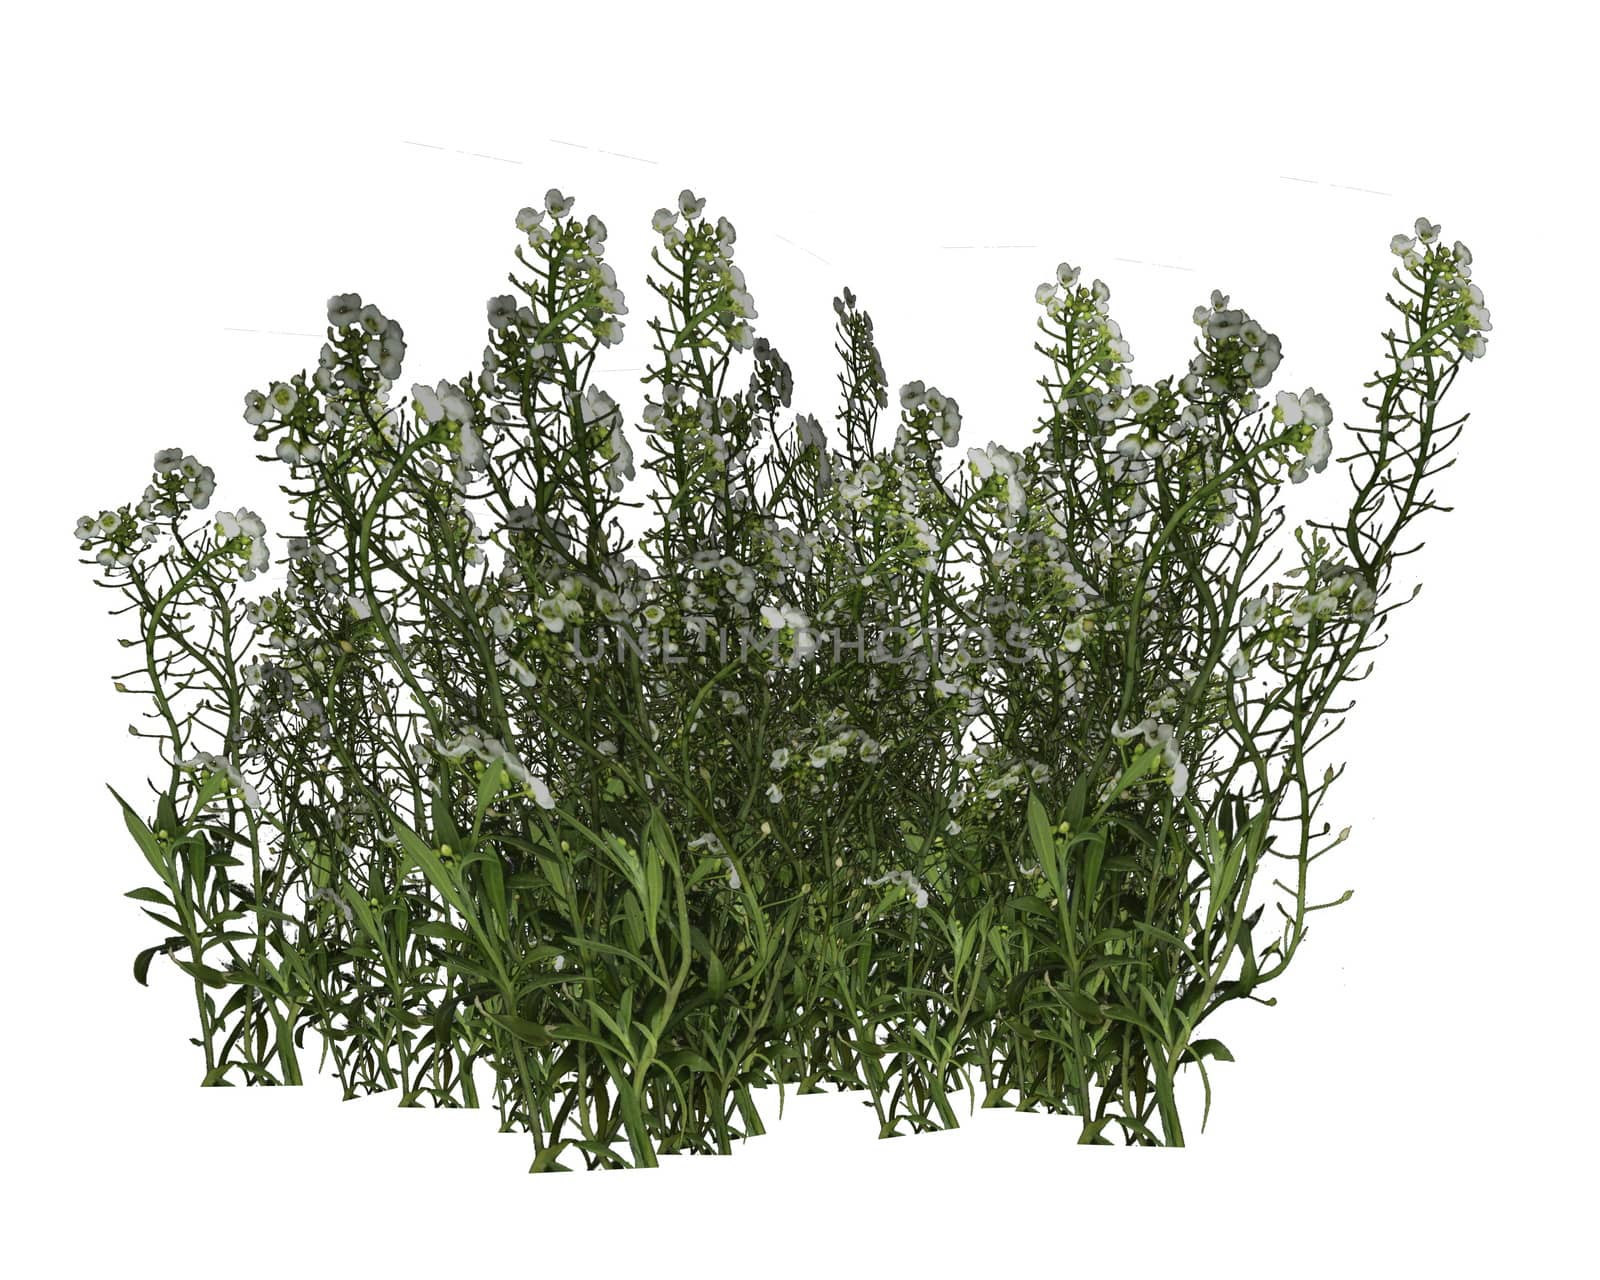 Grass and flowers - 3D render by Elenaphotos21